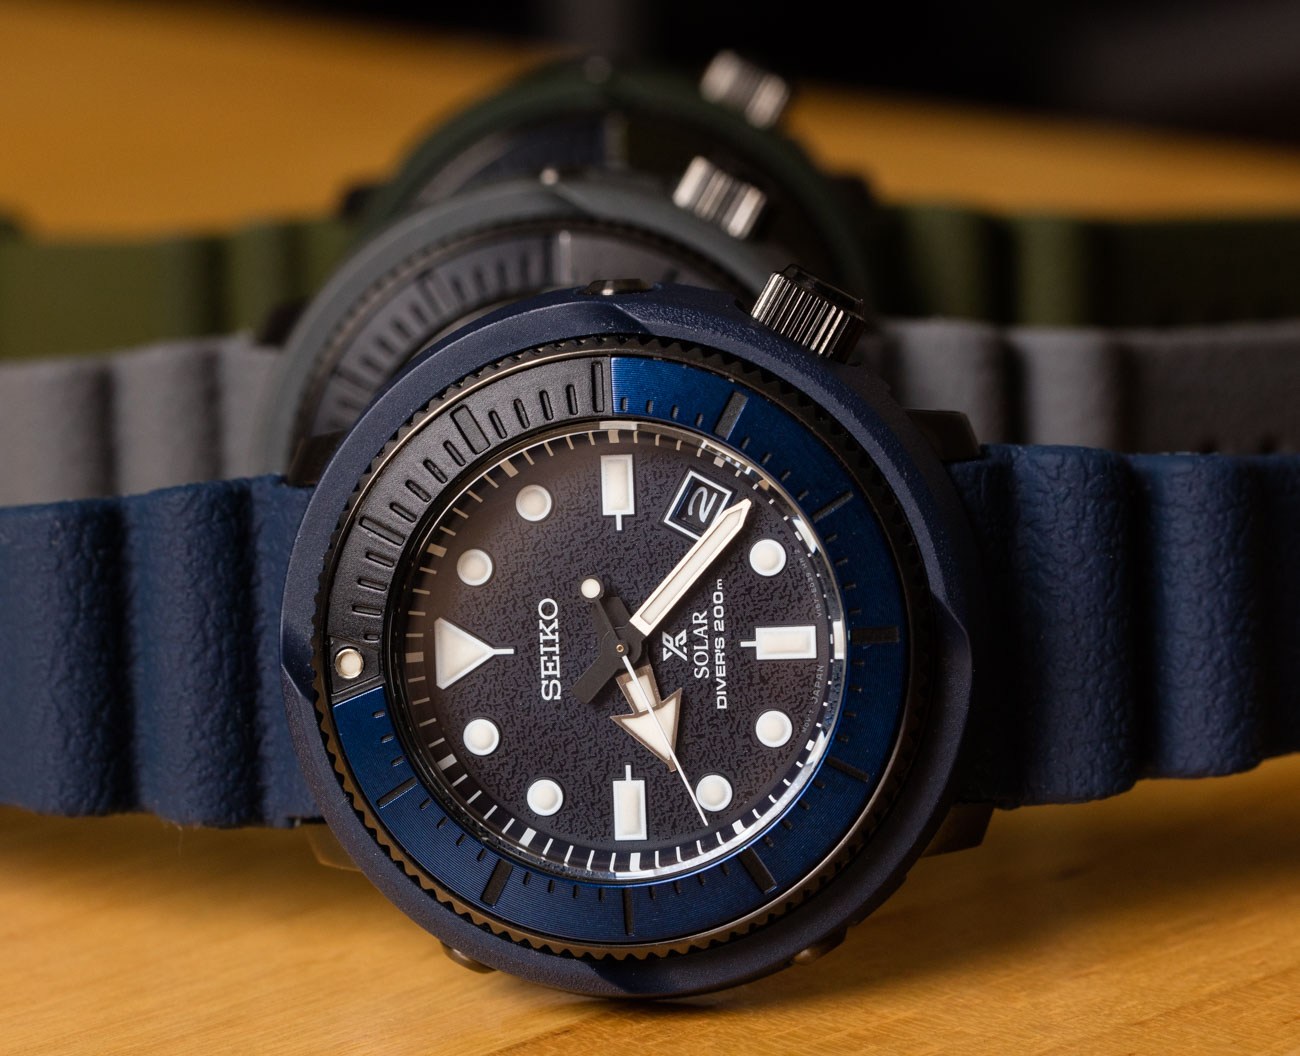 Seiko Street Series Watches Hands-On Debut |